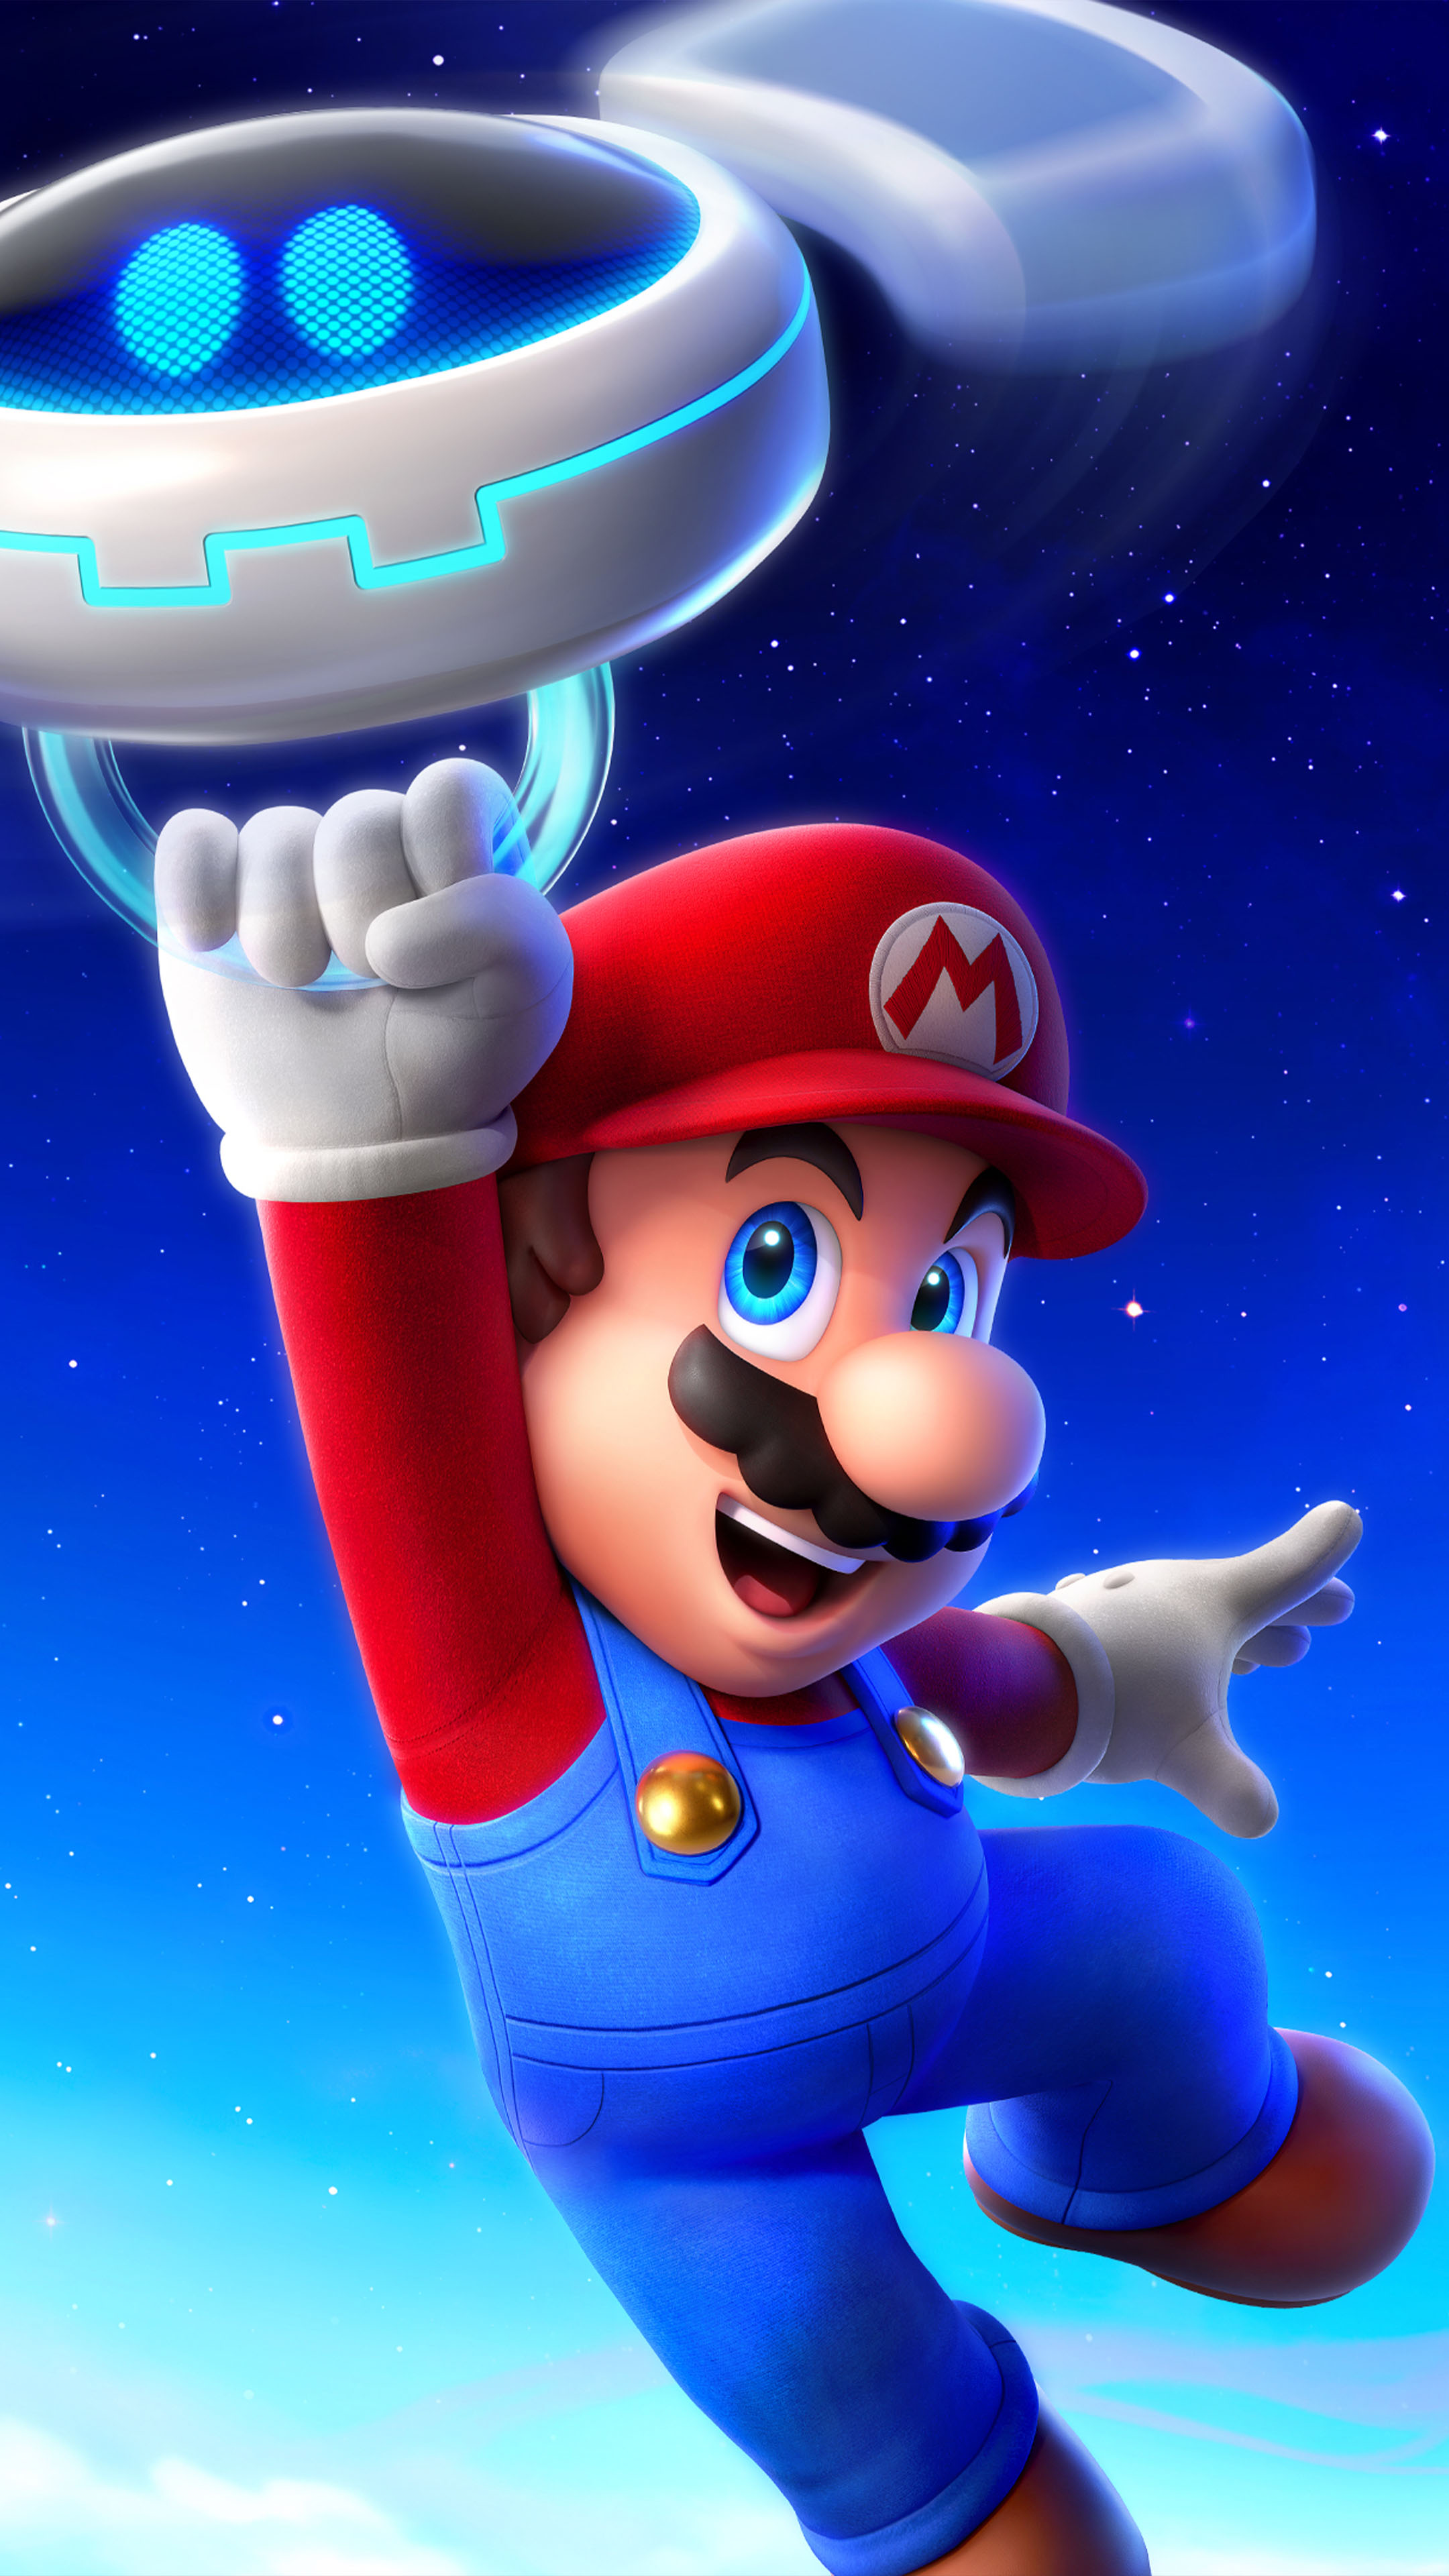 Mobile wallpaper: Fire, Mario, Video Game, Super Mario Bros, 1157316  download the picture for free.